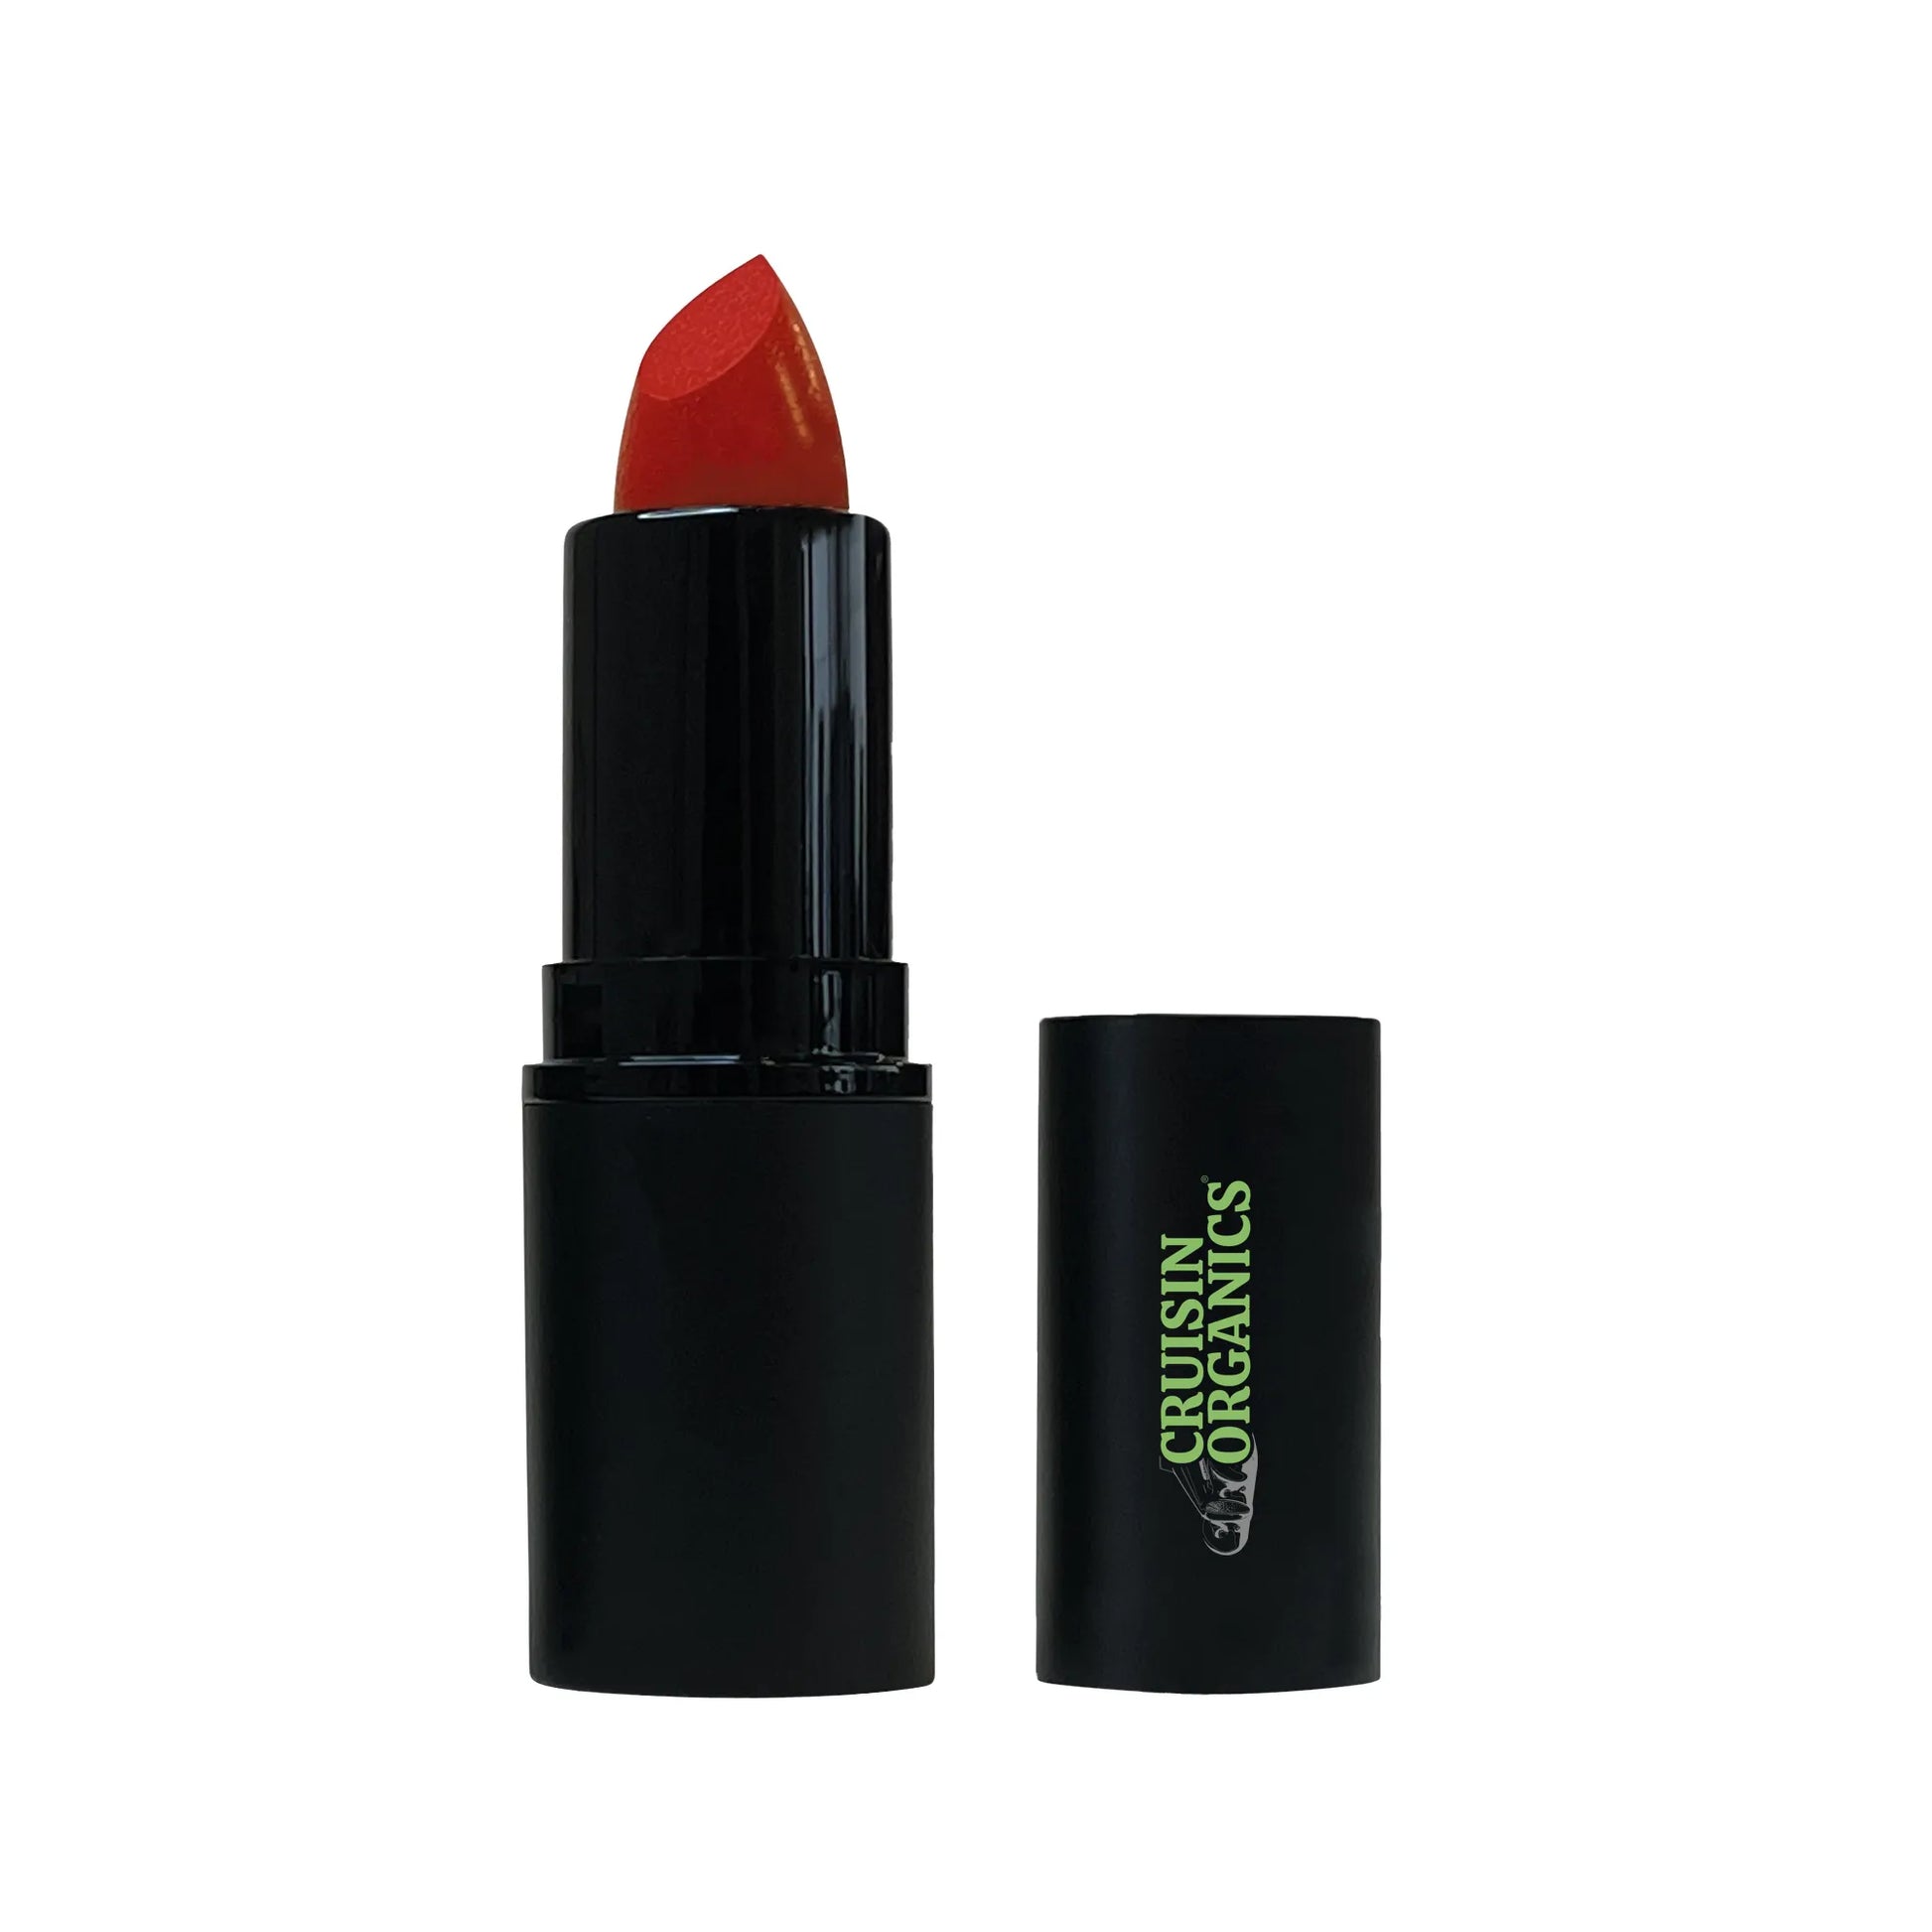 The Oh So Red lipstick you've been searching for has arrived. Infused with the enriching properties of beeswax, this lipstick provides unparalleled moisturization and shields your lips from harmful UV radiation. Utilizing natural beeswax, this lipstick delivers a sheer gloss for a final look that's distinct from the typical matte finishes. Boasting rich pigments and a delicate blend of jojoba and castor seed oils, your lips will exude lushness, hydration, and plumpness. Ideal finishing touch.